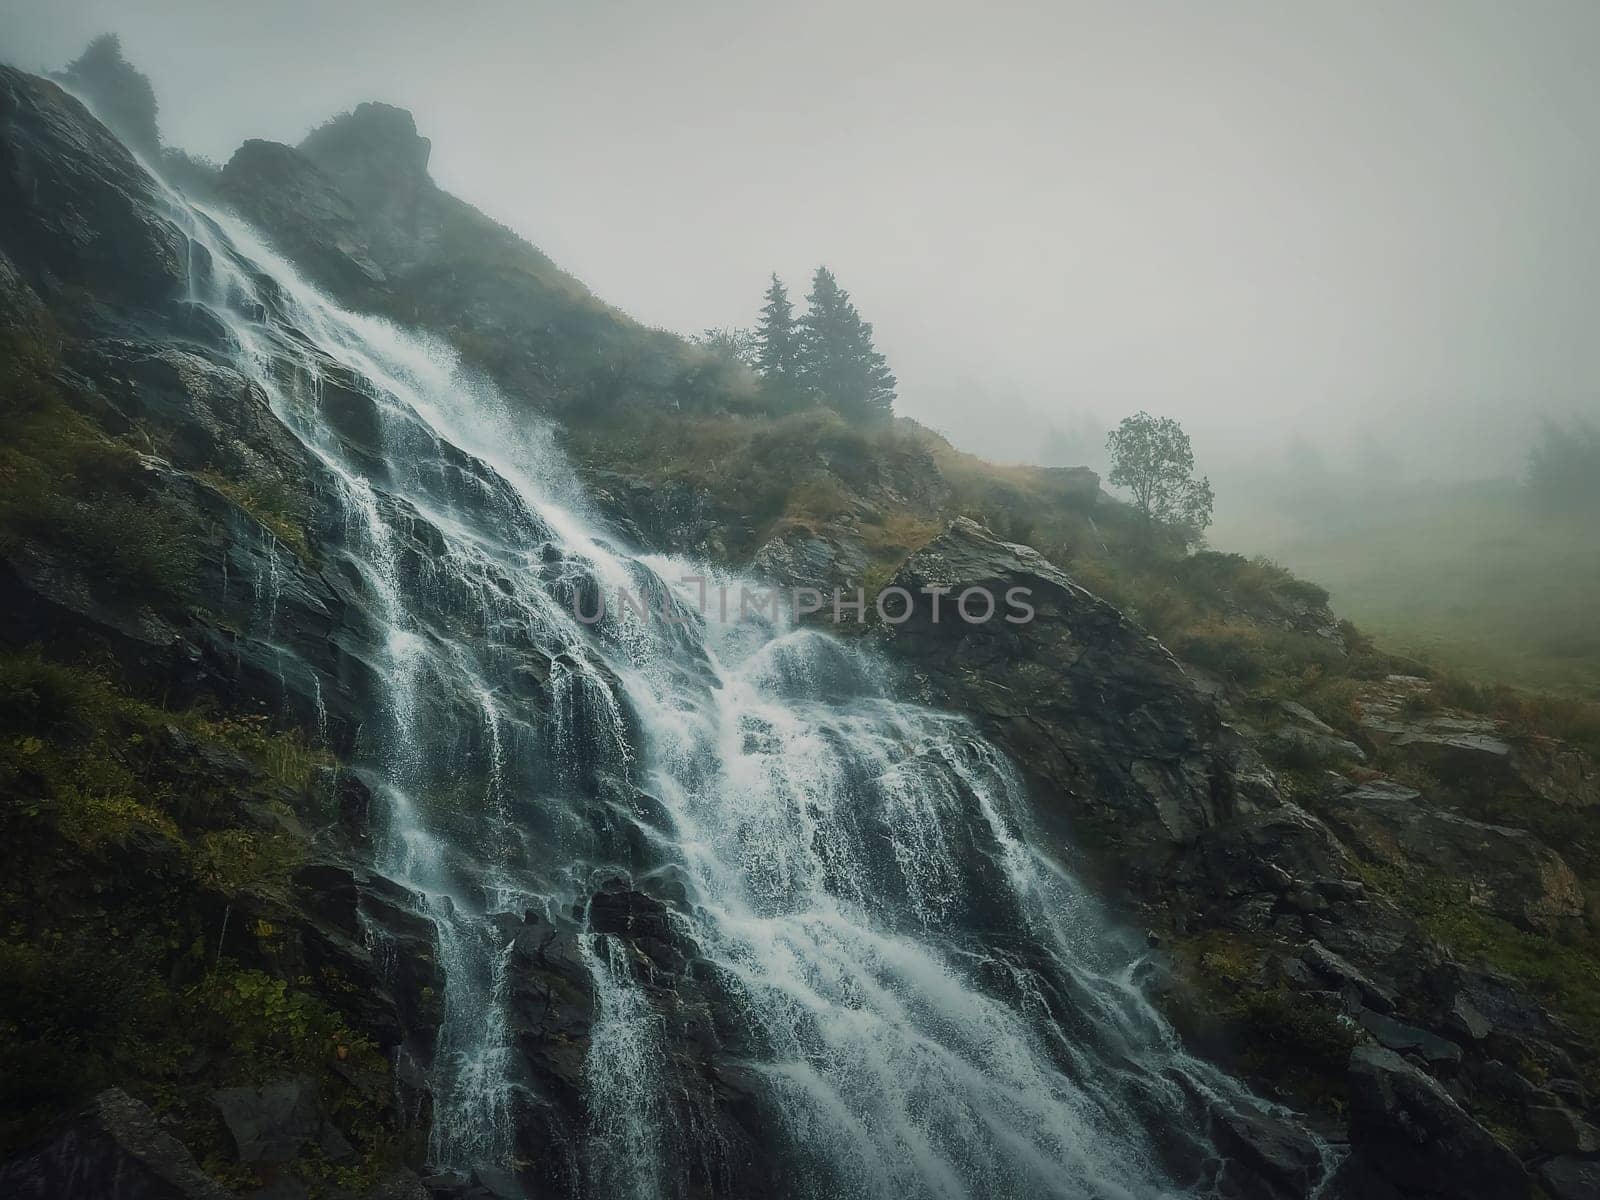 Capra waterfall on the Transfagarasan route in romanian Carpathians. Idyllic scene with a big river flowing down through the rocks in a misty autumn morning